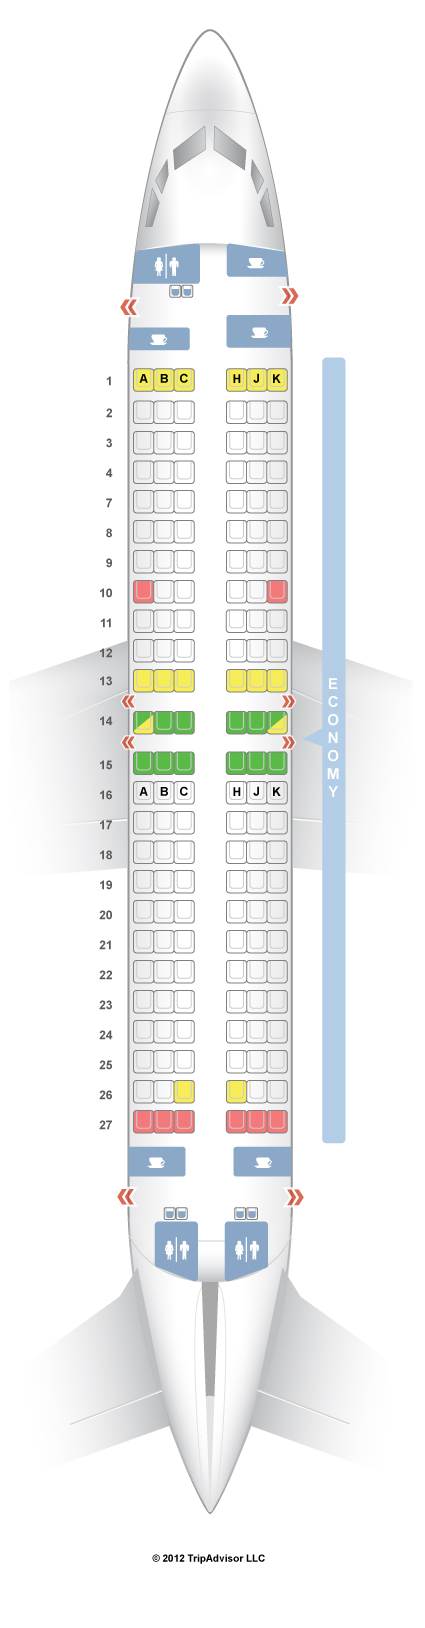 Boeing 737 400 Jet Seating Chart